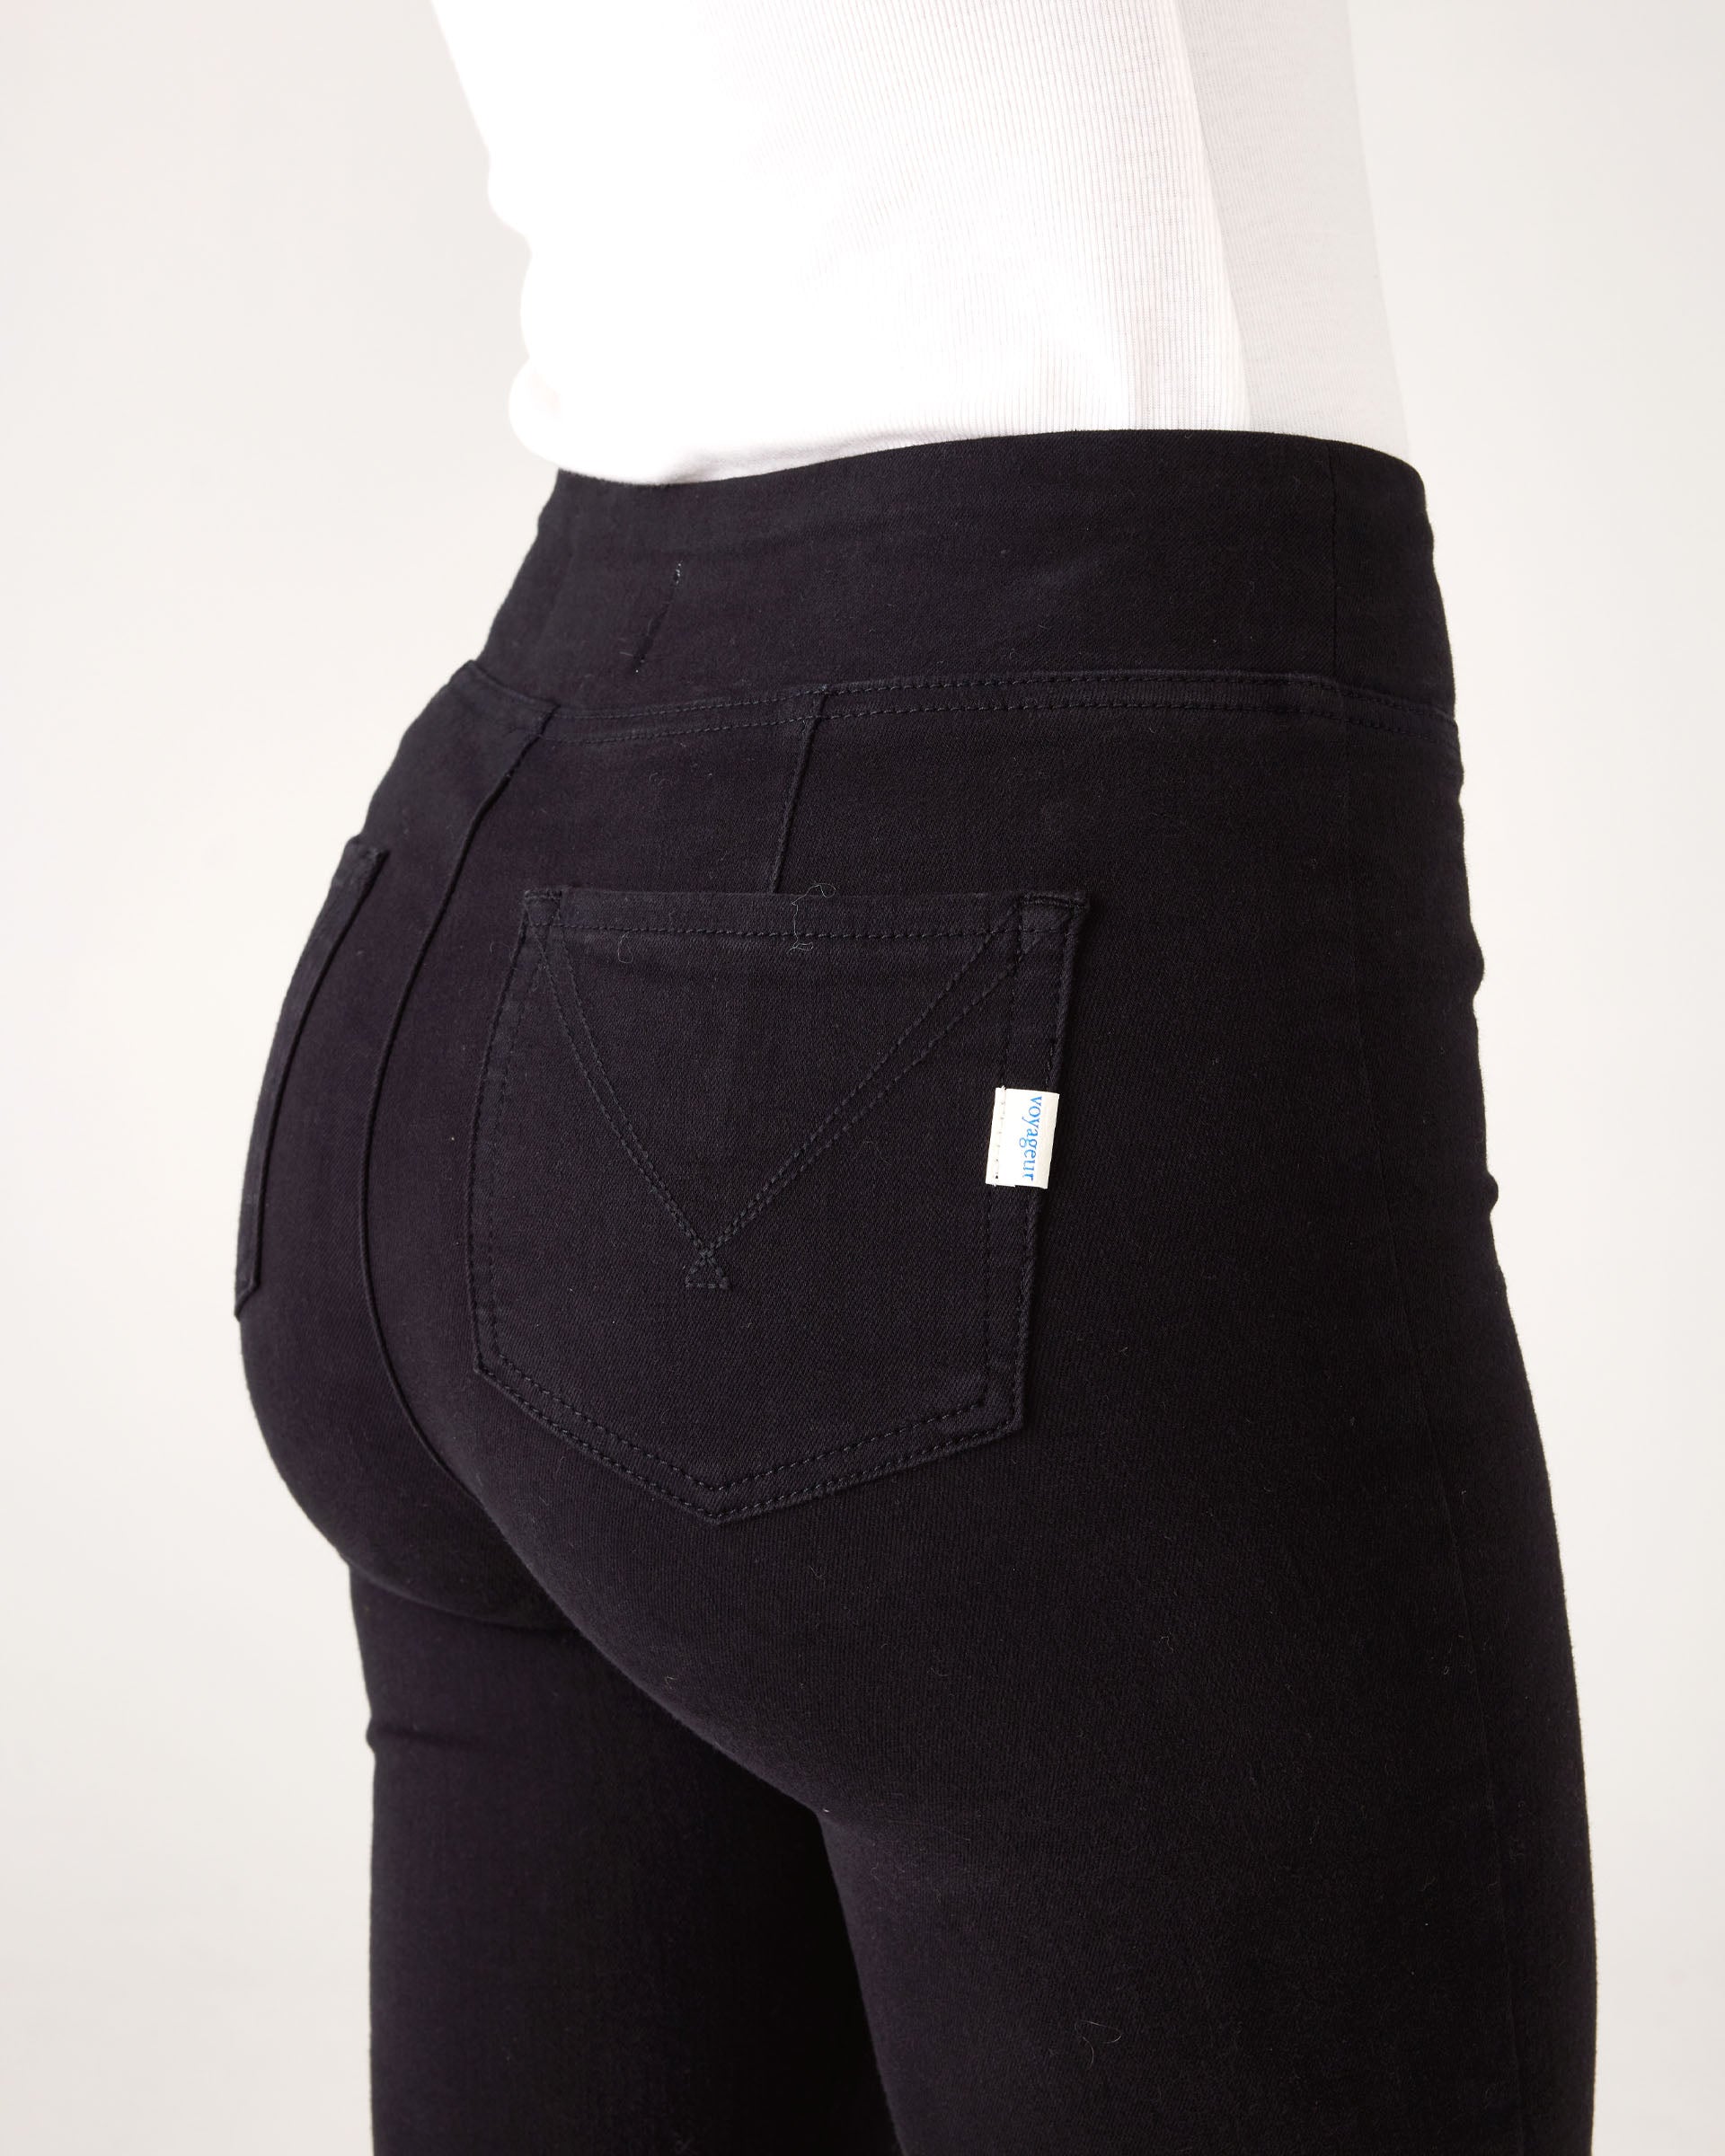 Close-up from behind: Woman wearing Mersea Nomad black ankle cigarette jeans, standing against a white background